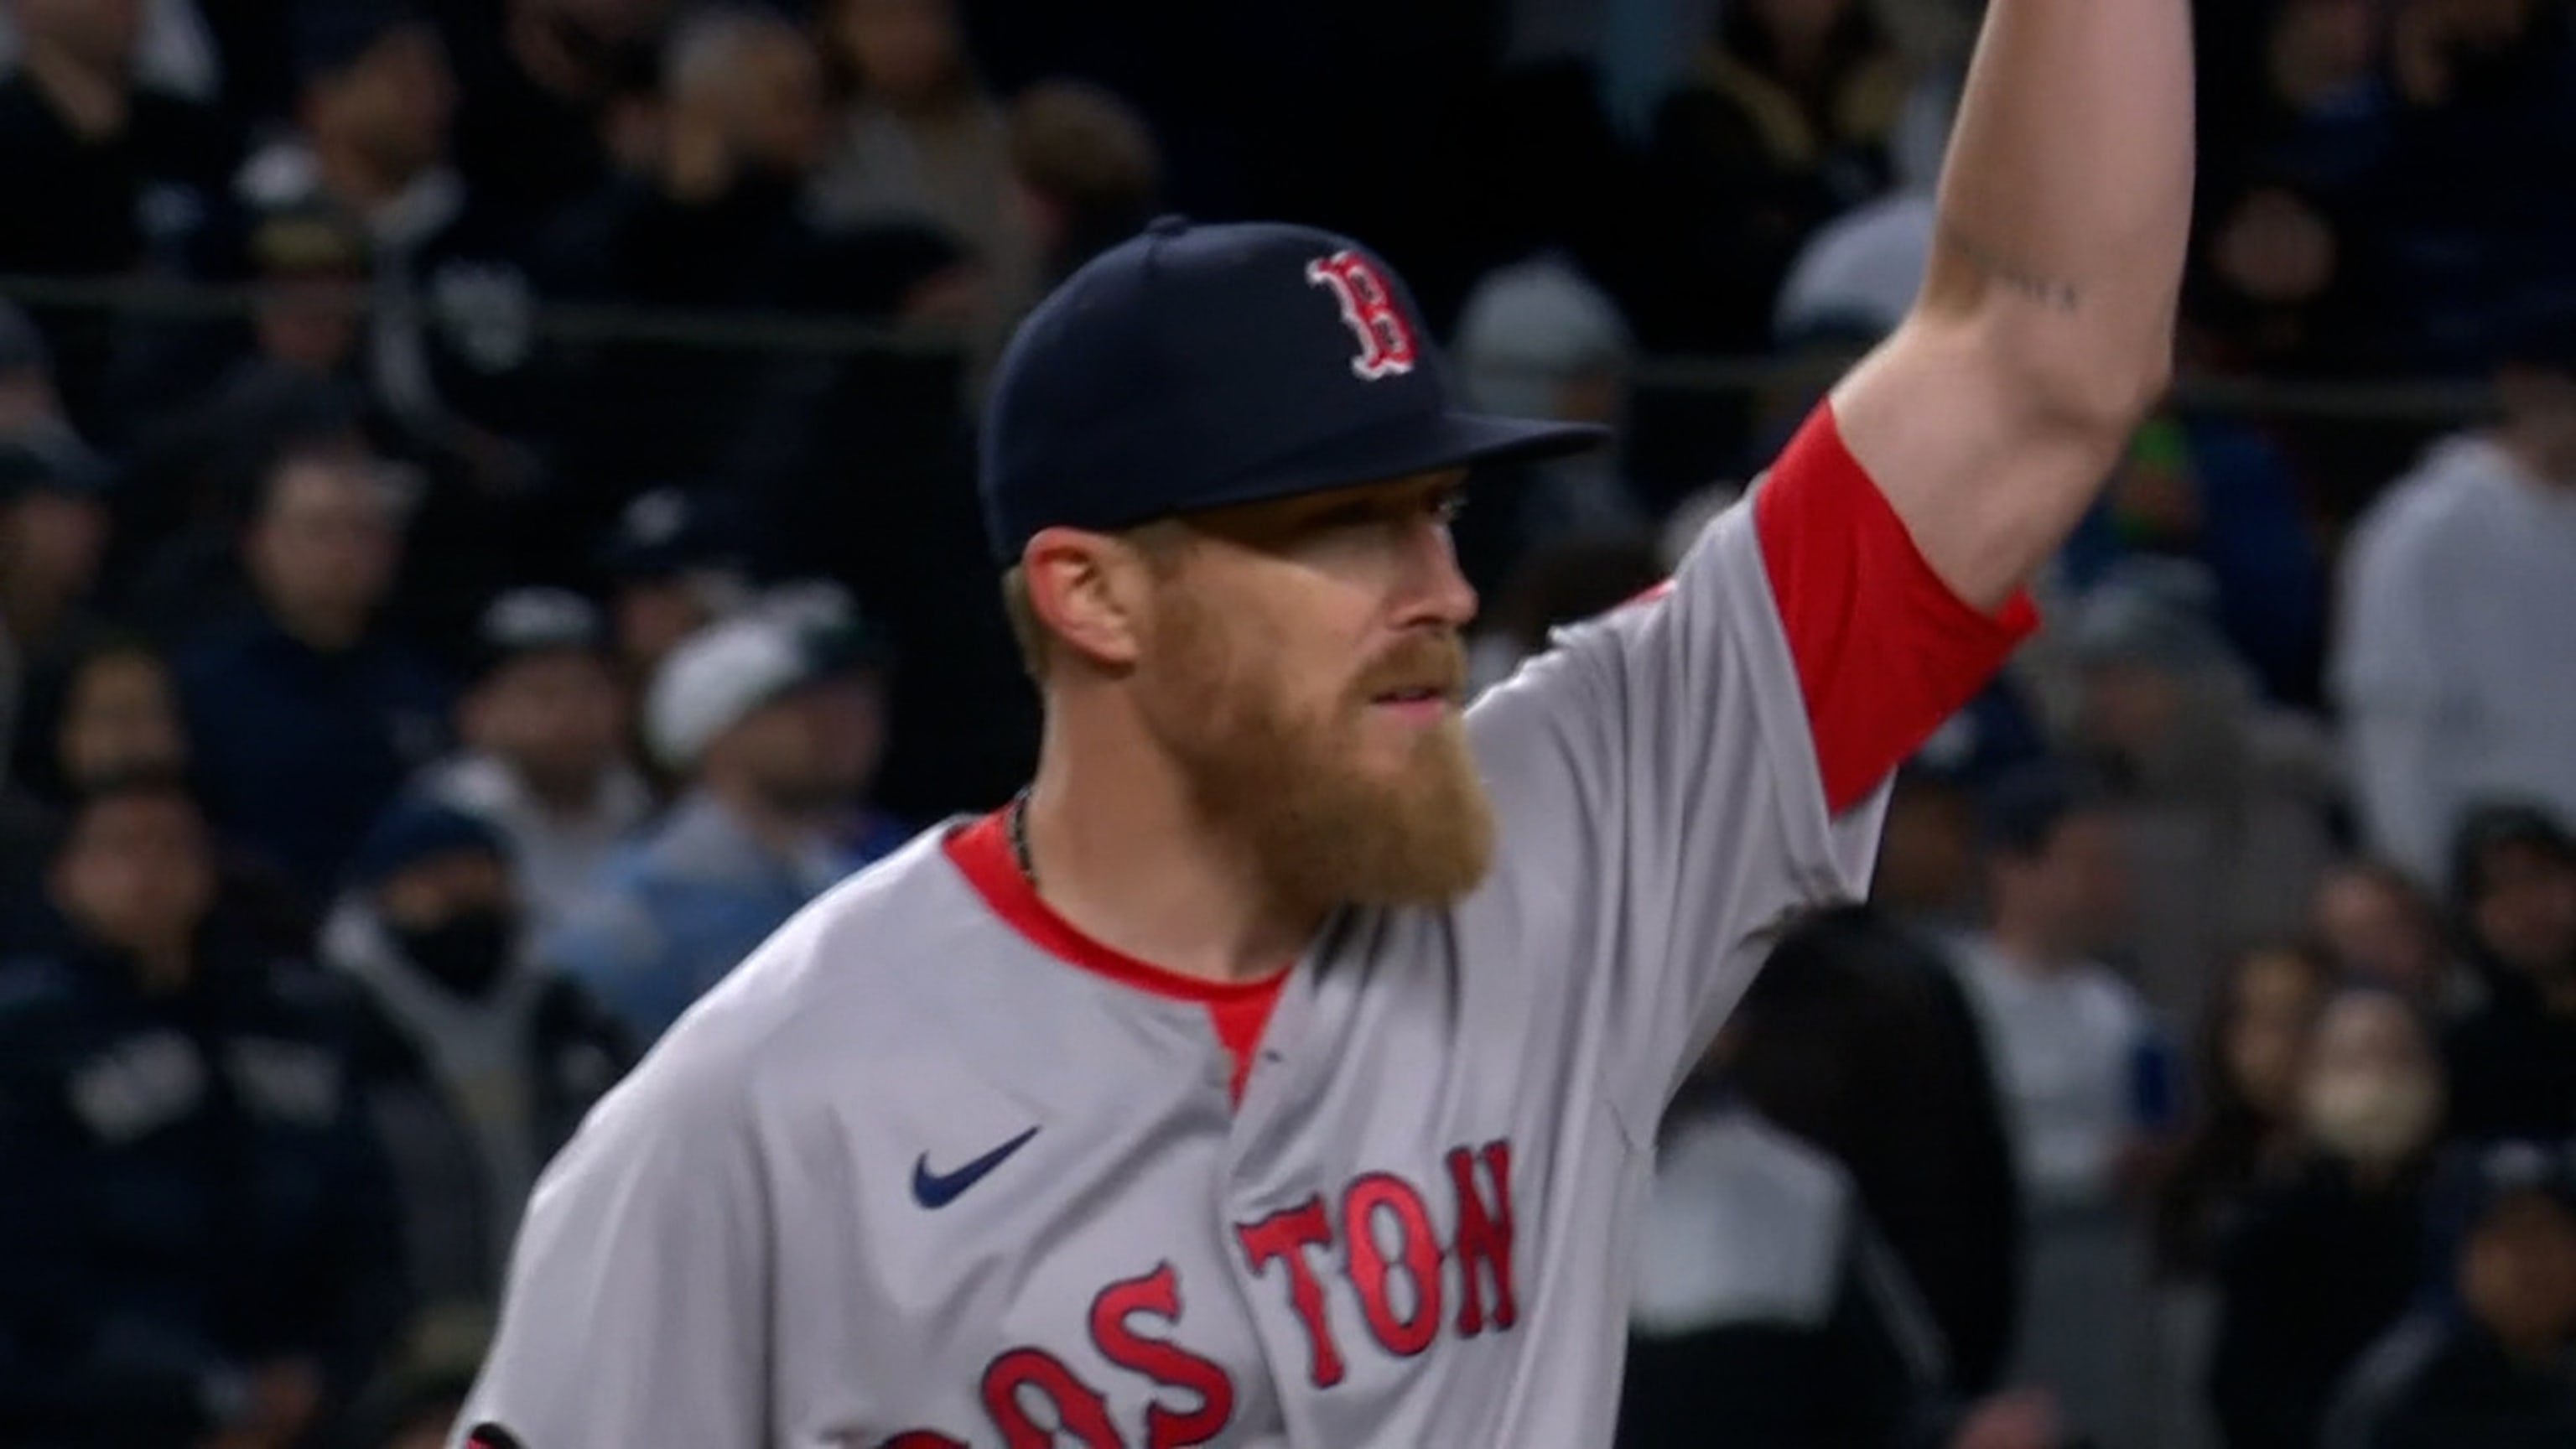 BSJ Game Report: Red Sox 8, Yankees 1 - Kutter Crawford sharp as